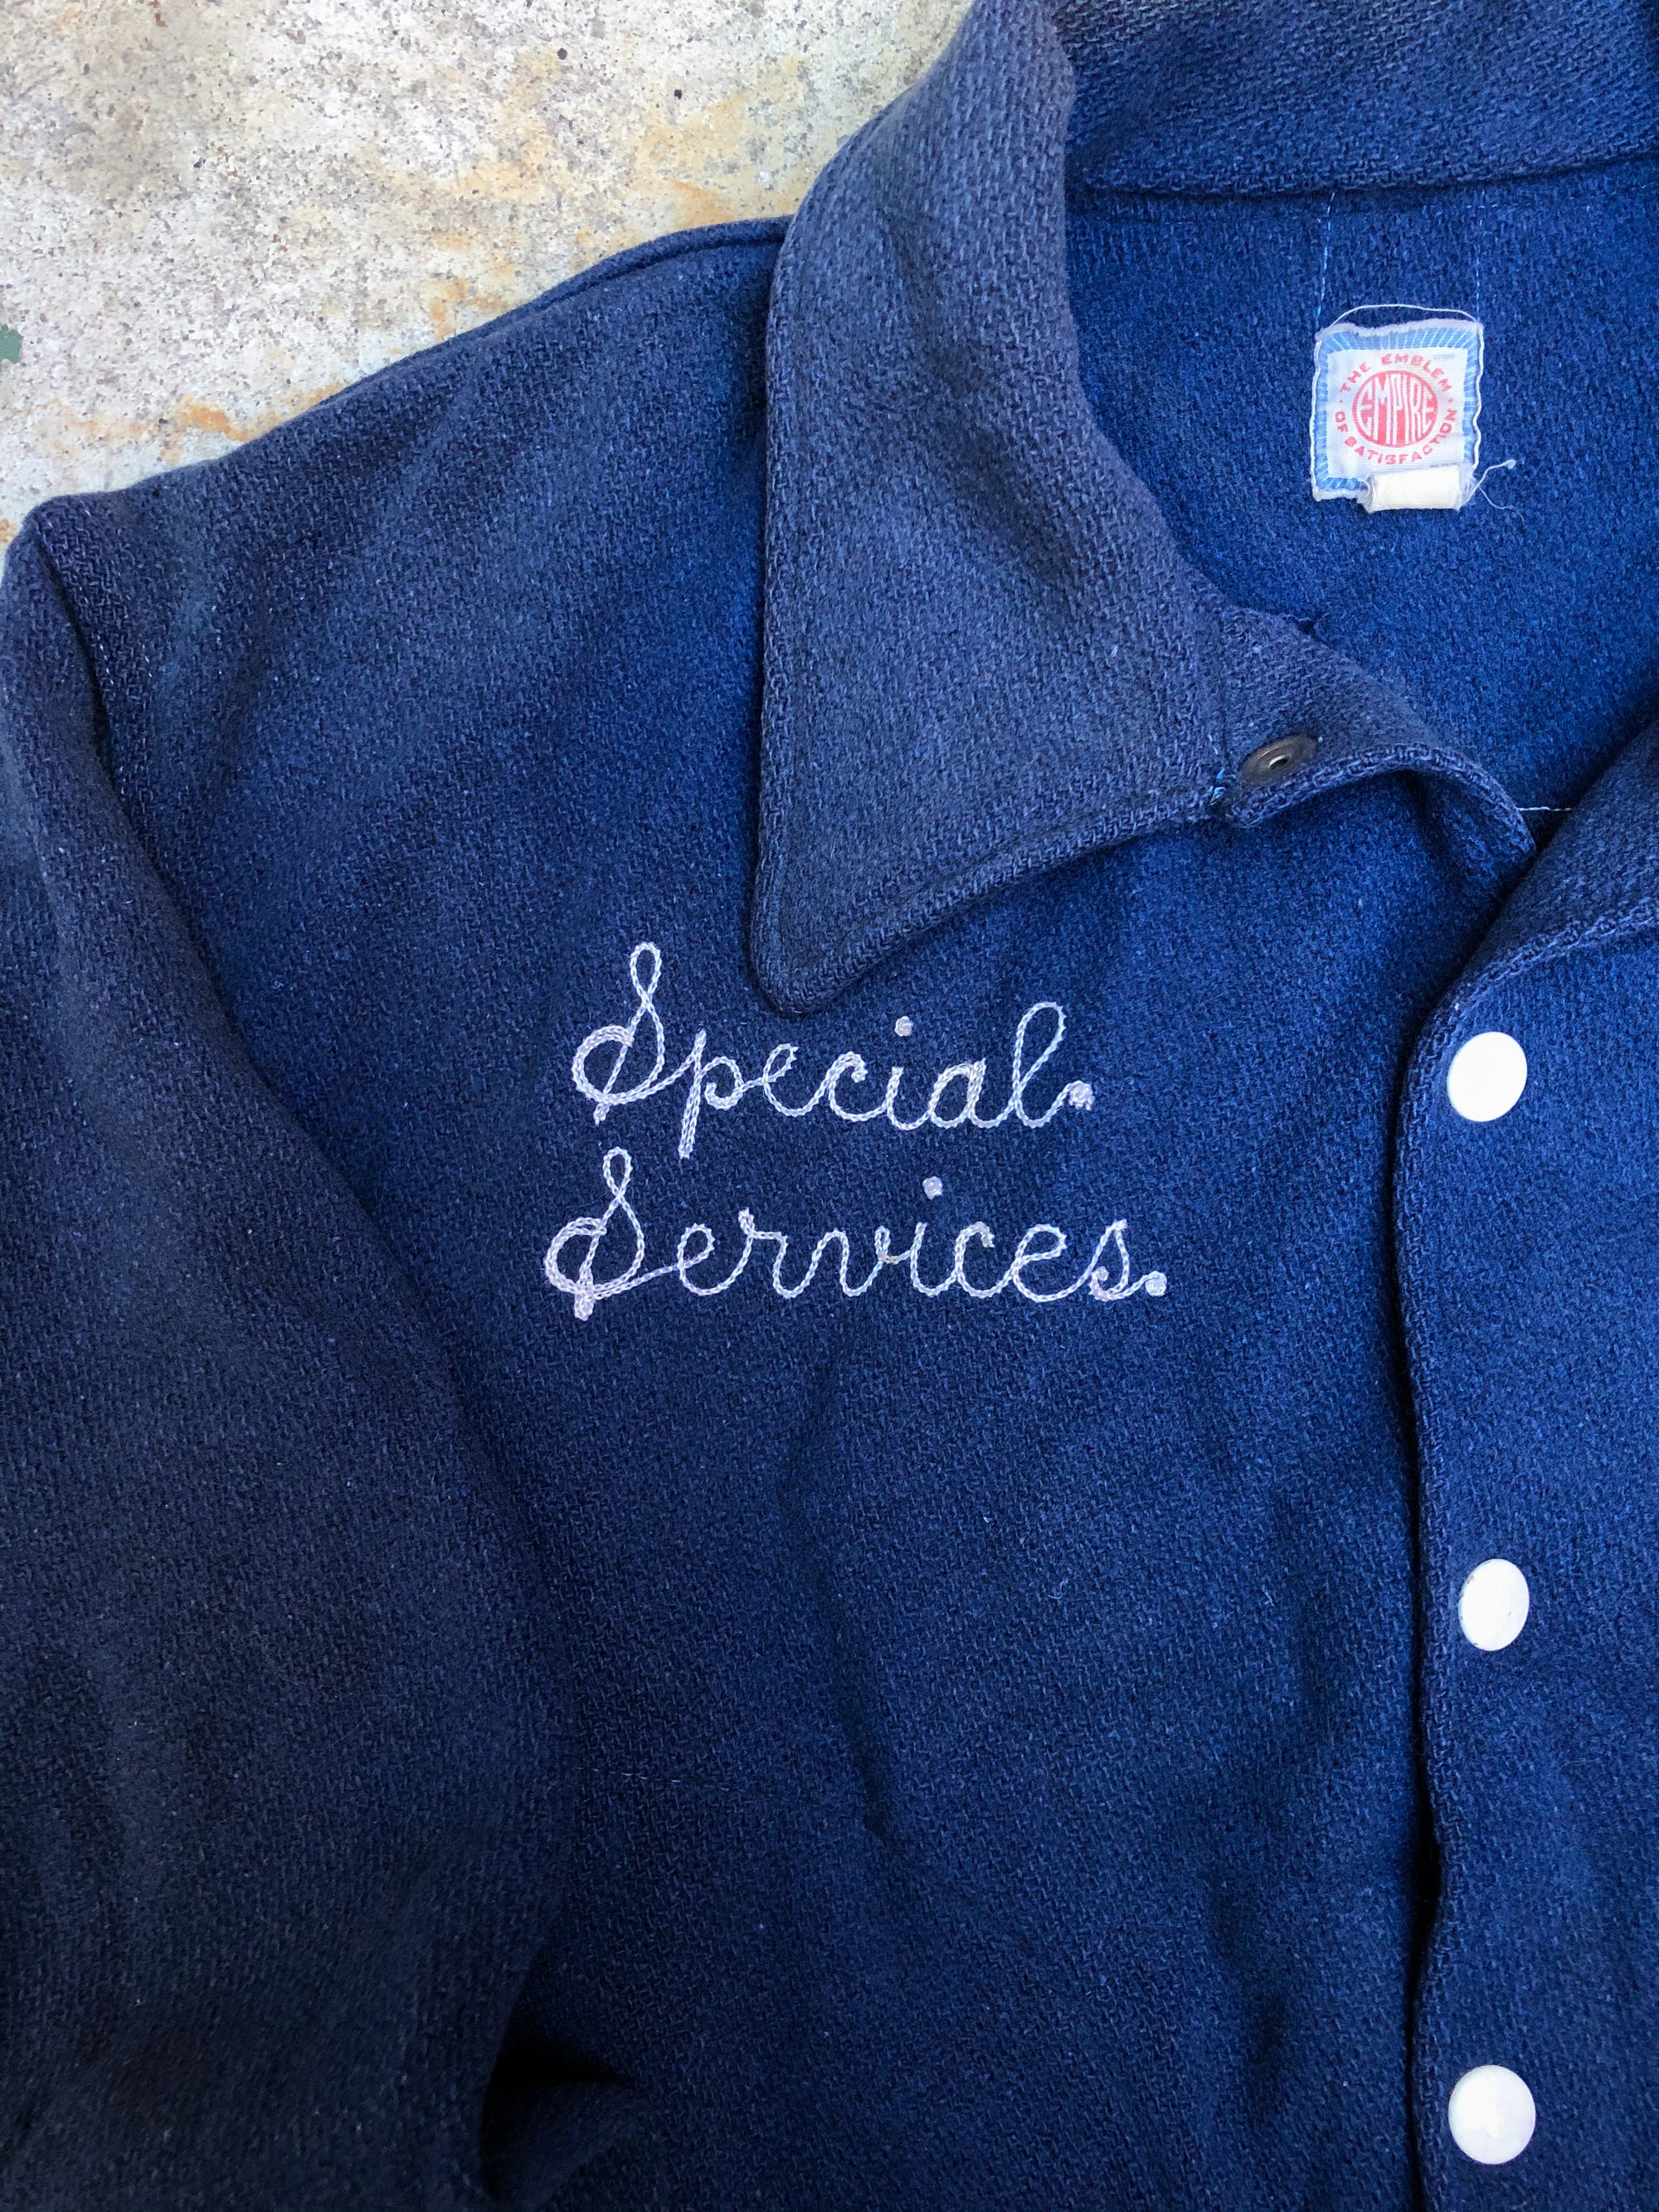 1950s Faded Blue Chain Stitch “Special Services” Varsity Jacket (M)